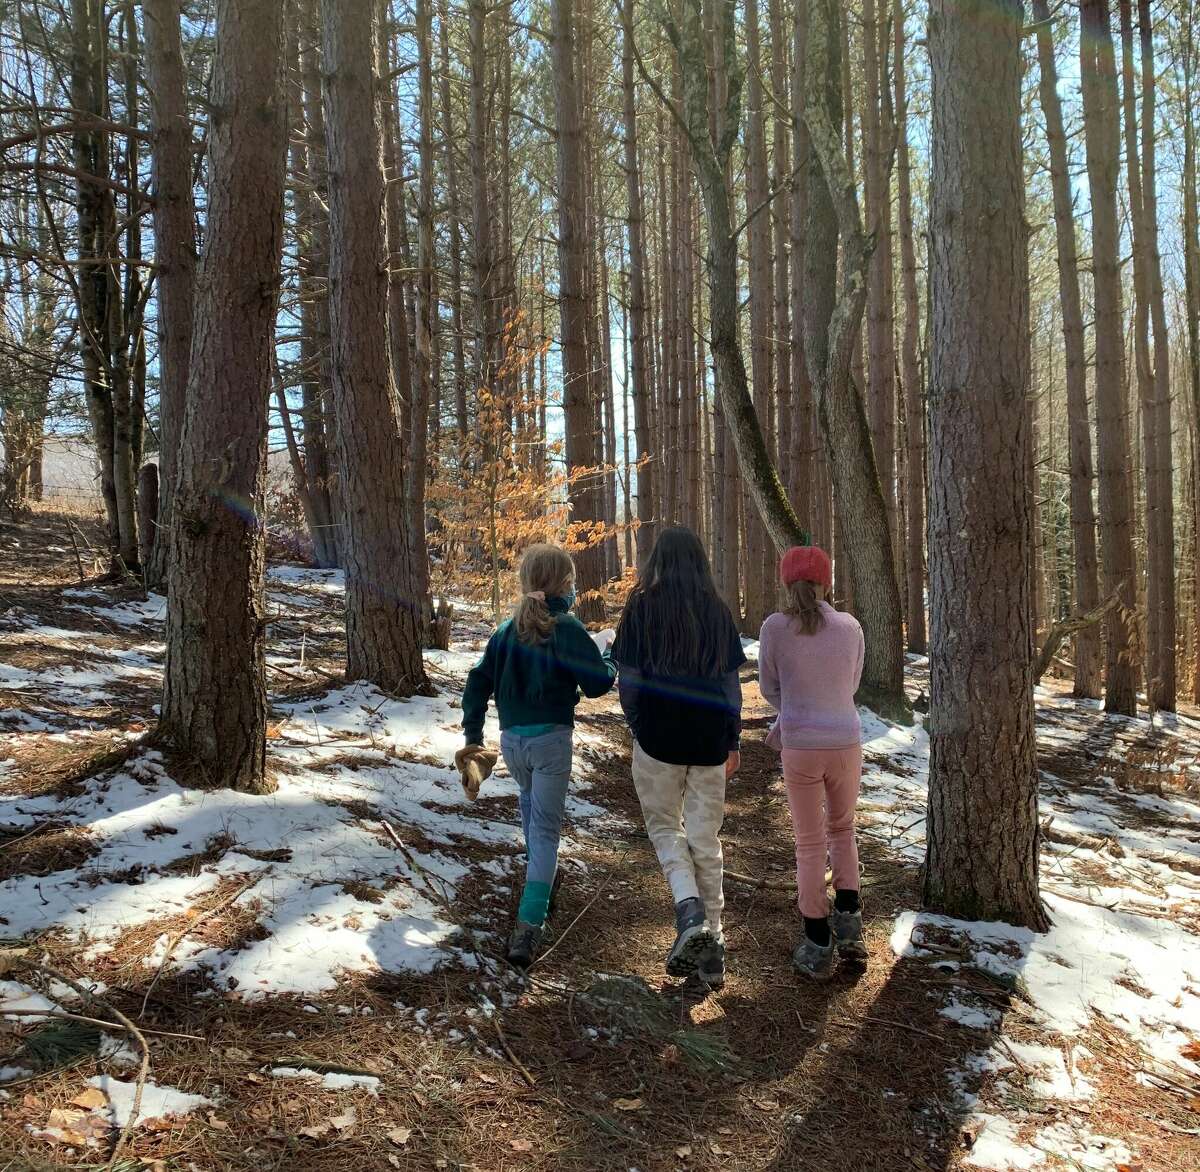 The Andes Rail Trail and Bullet Hole Spur route combine to create a family-friendly hiking outing in eastern Delaware County in the Catskills.